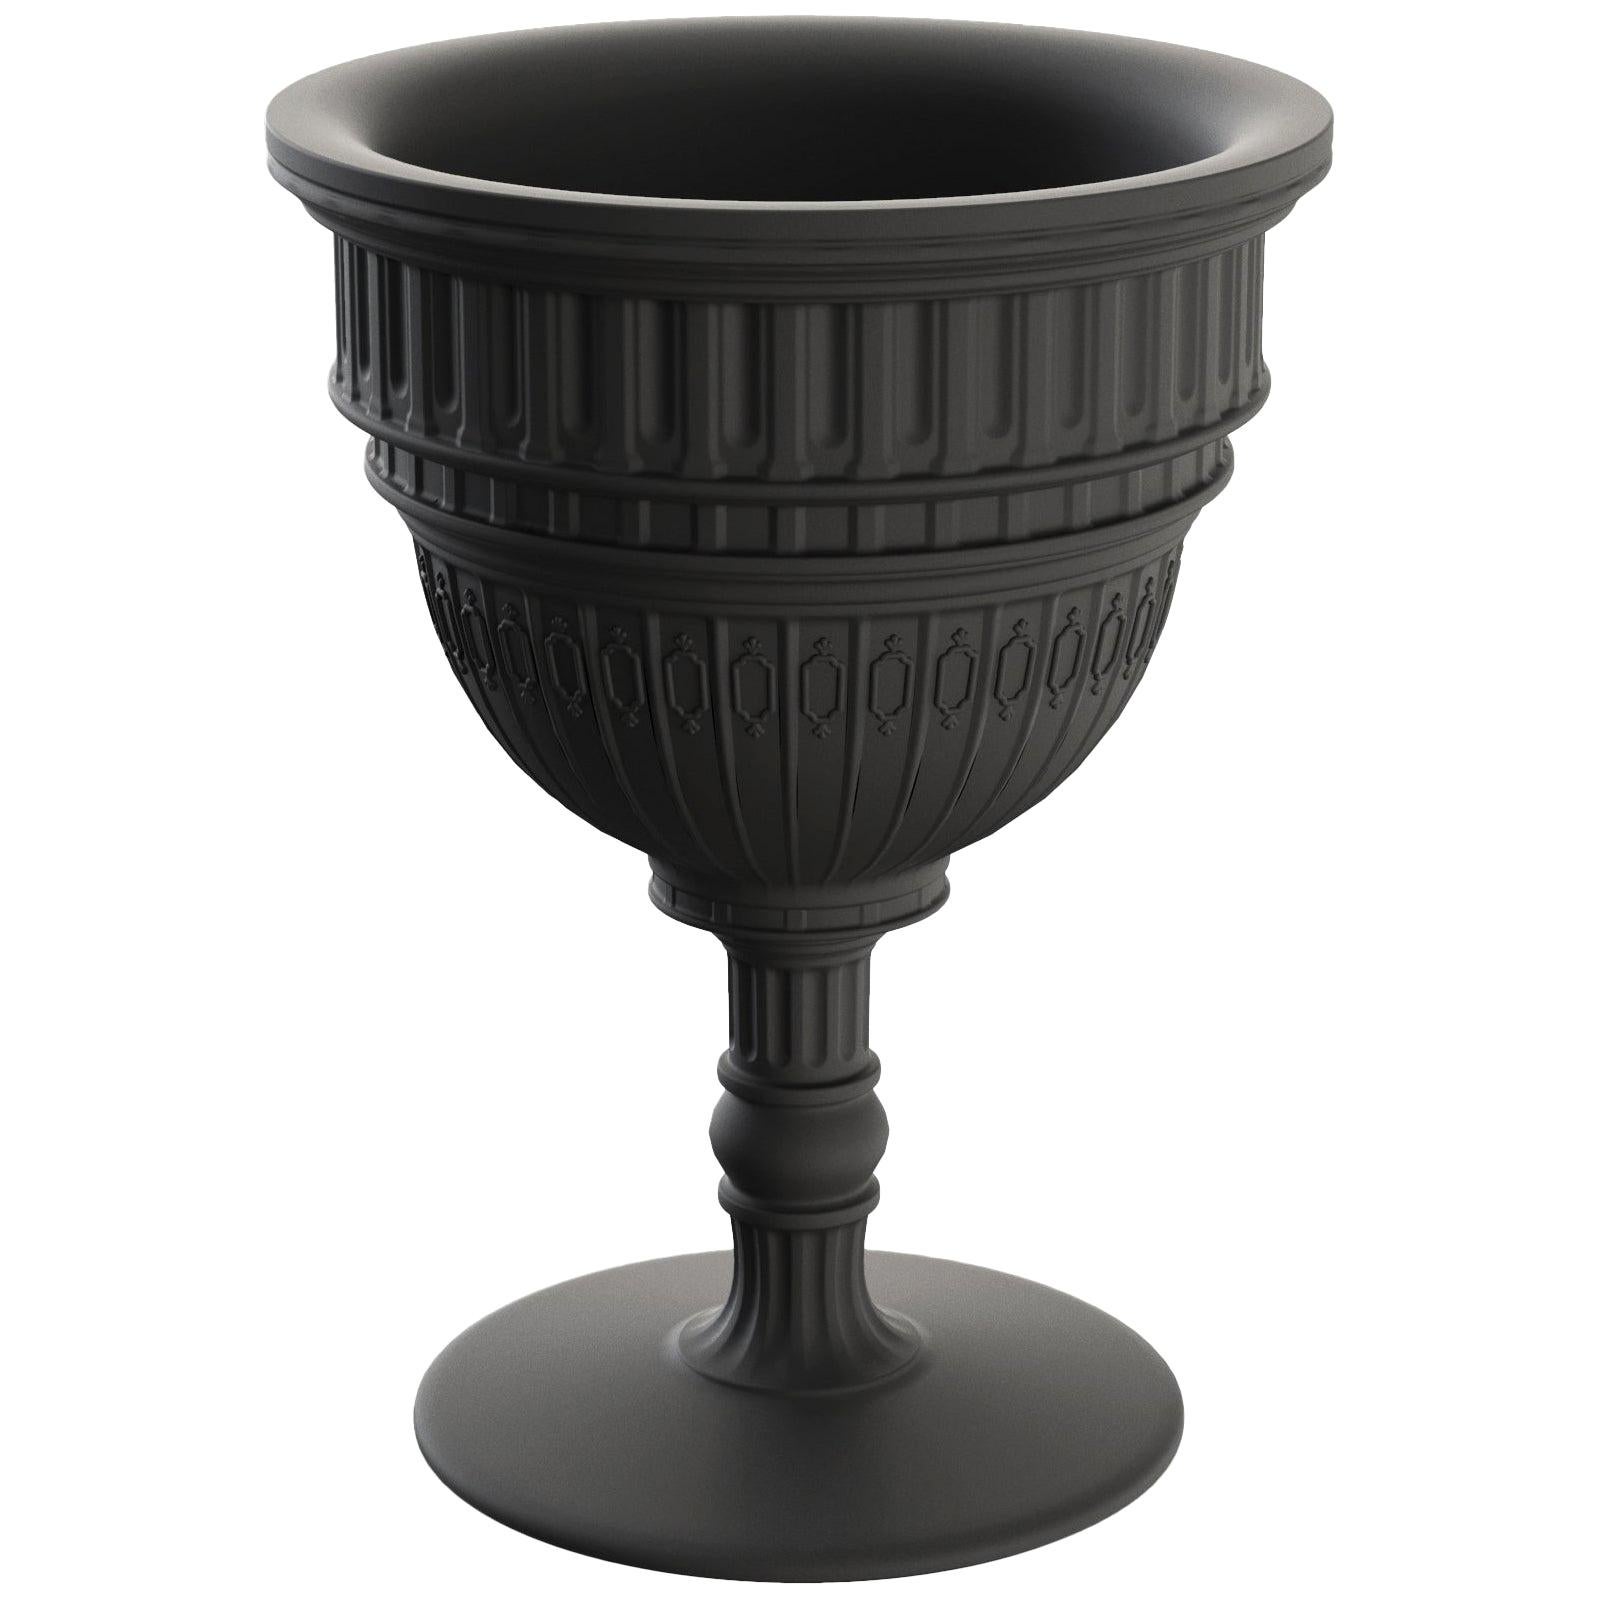 For Sale: Black Modern Black or White Mexican Chinese Inspired Planter or Champagne Cooler